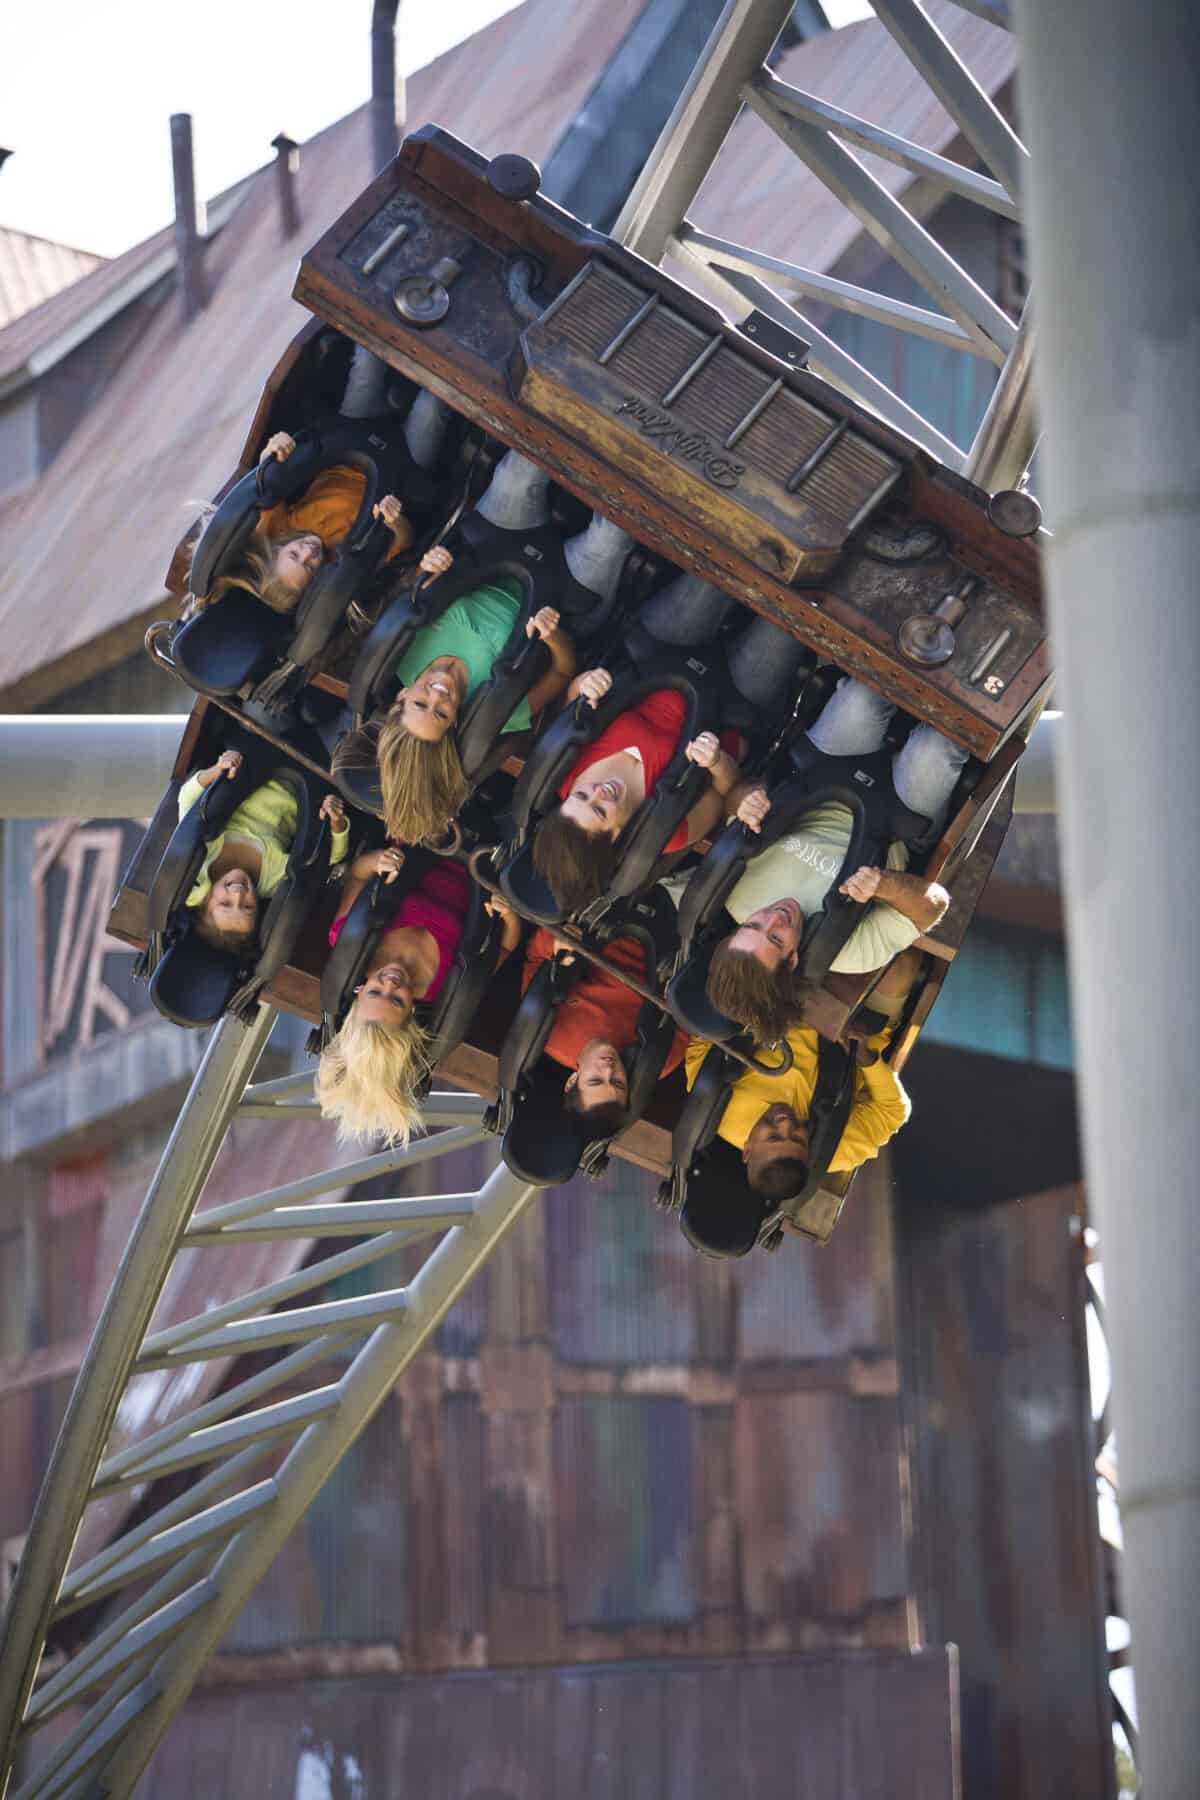 Mystery Mine is a partially dark ride at Dollywood. Image: Dollywood